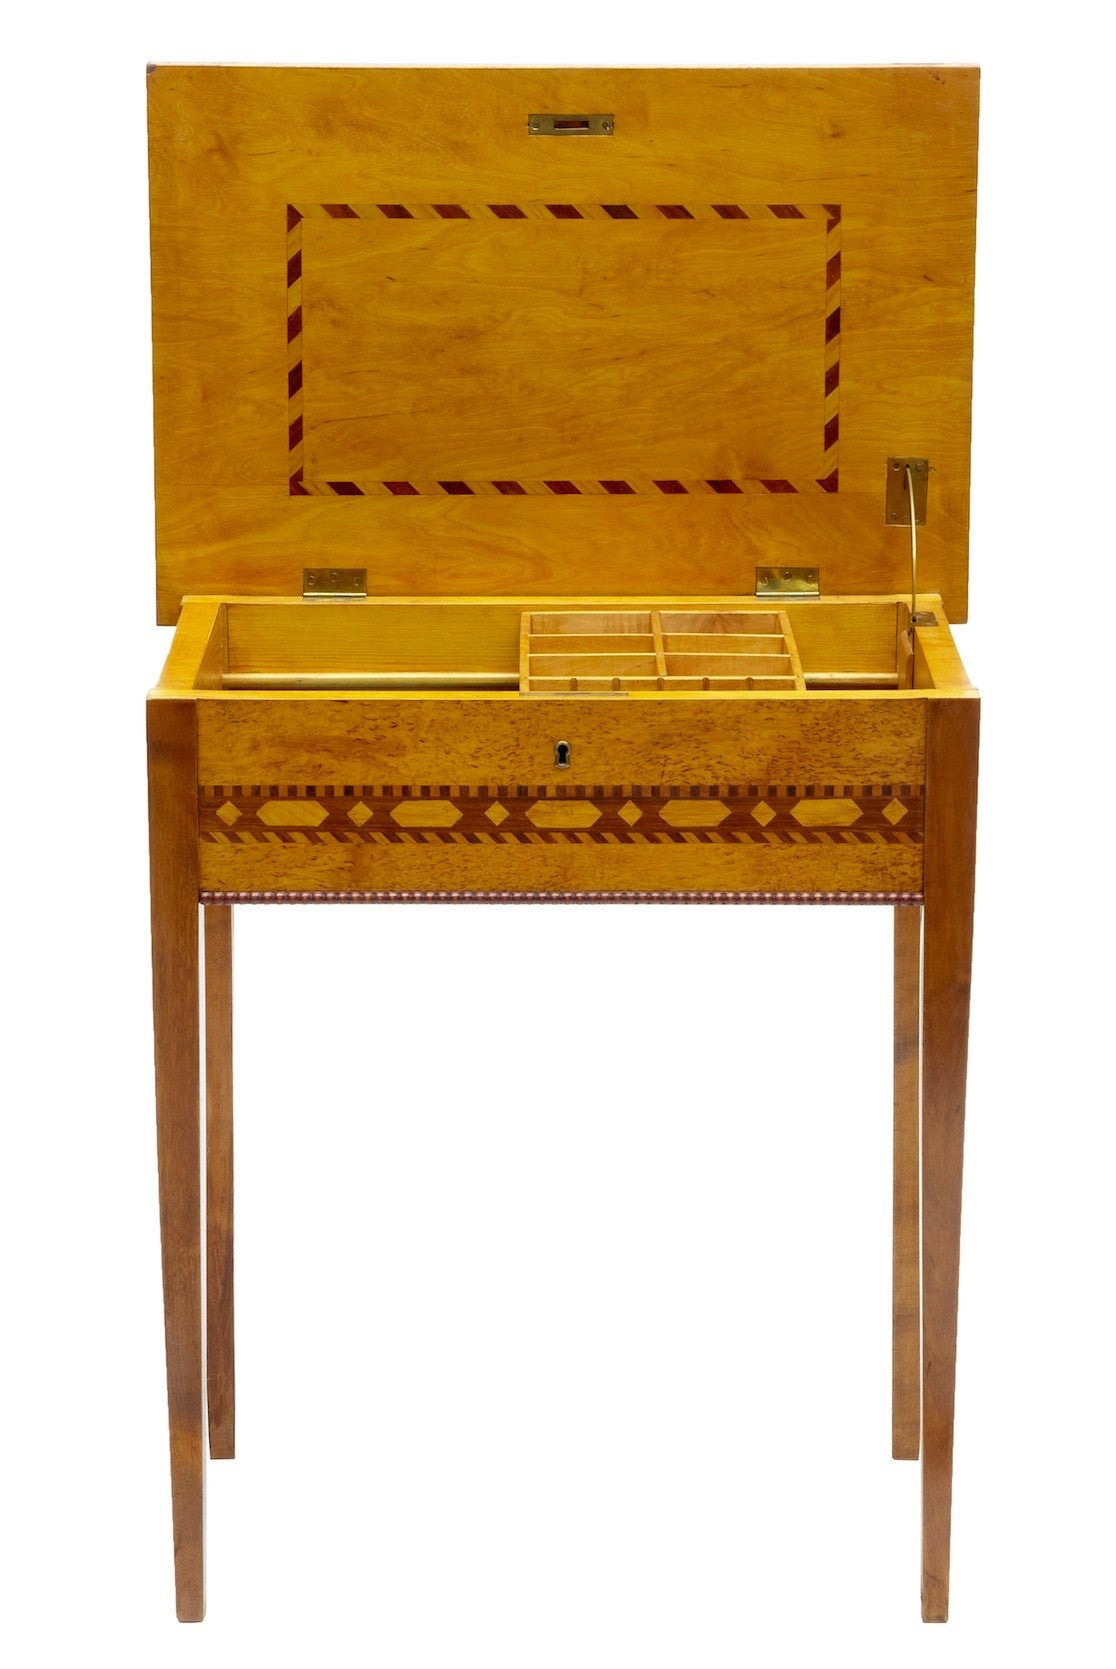 Inlaid with walnut and rosewood, birch sewing table, circa 1880. 

Flip-top lid opens to reveal a fitted interior with sliding compartment. 

Standing on tapering legs.

Measures: Height 26 3/4"

width 23 1/4"

depth 16".